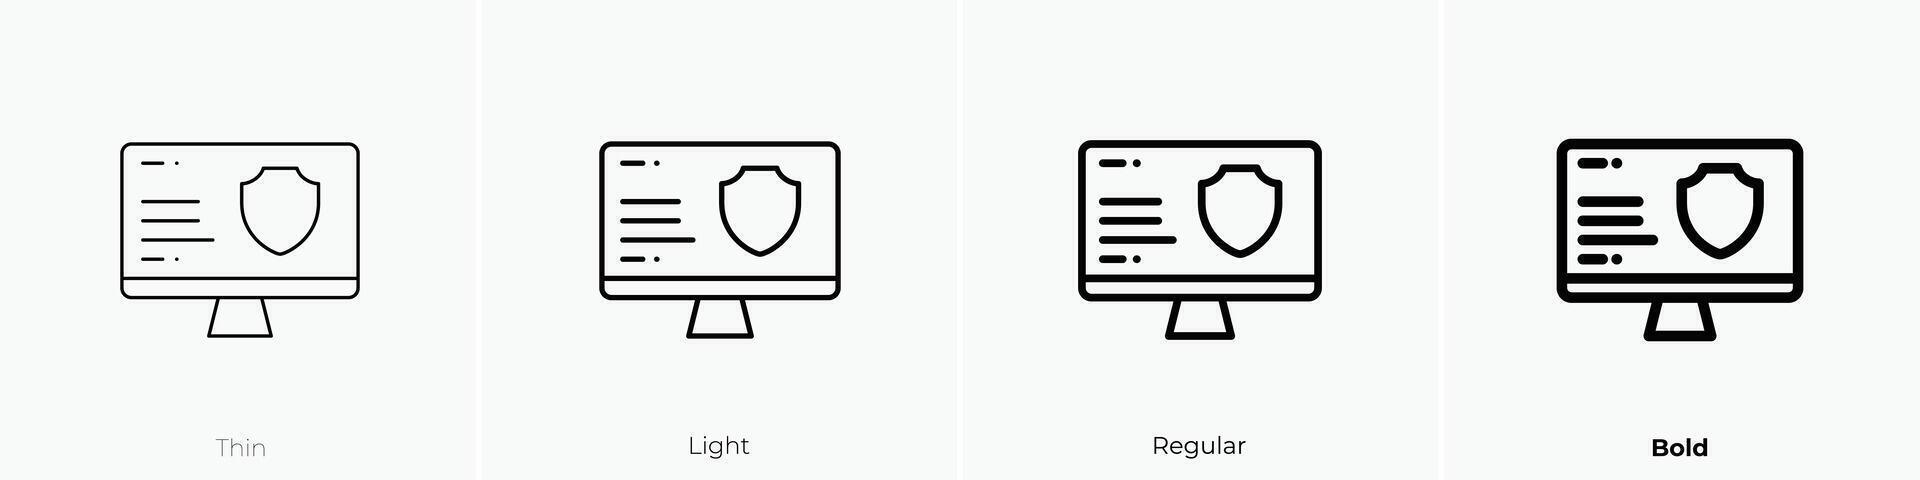 monitor icon. Thin, Light, Regular And Bold style design isolated on white background vector